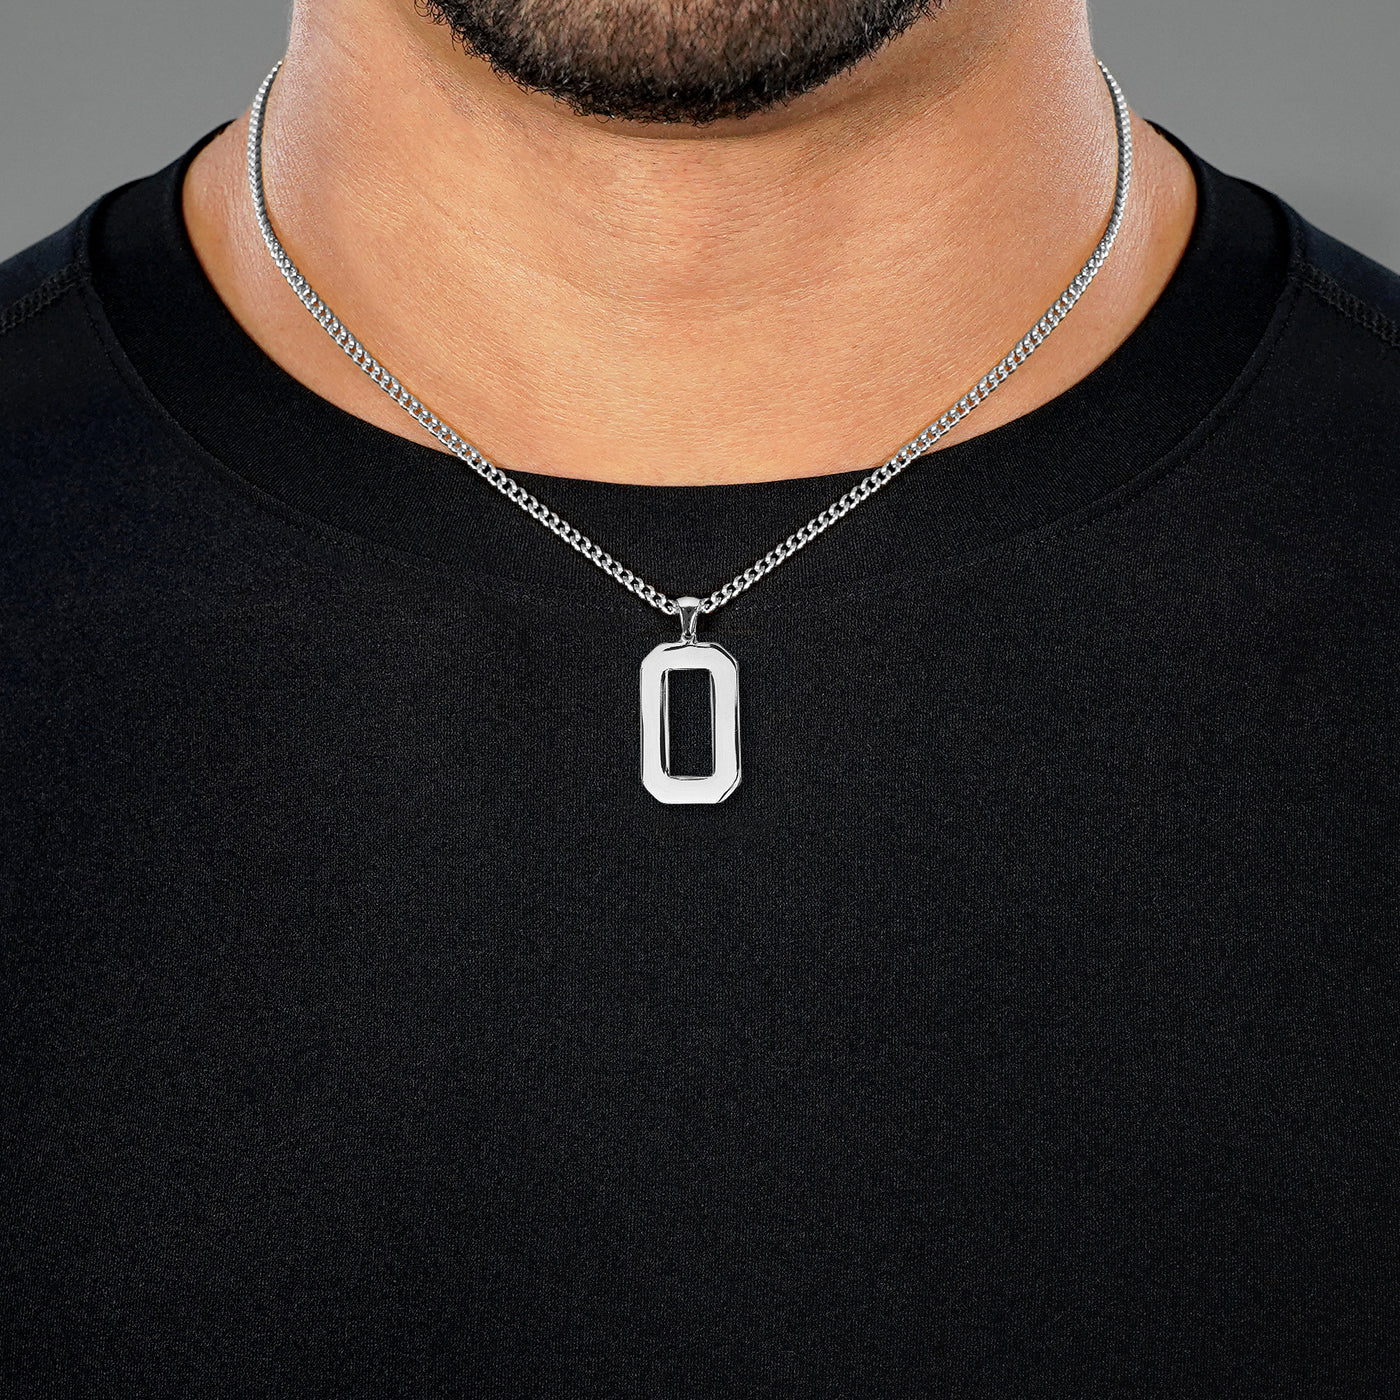 0 Number Pendant with Chain Necklace - Stainless Steel